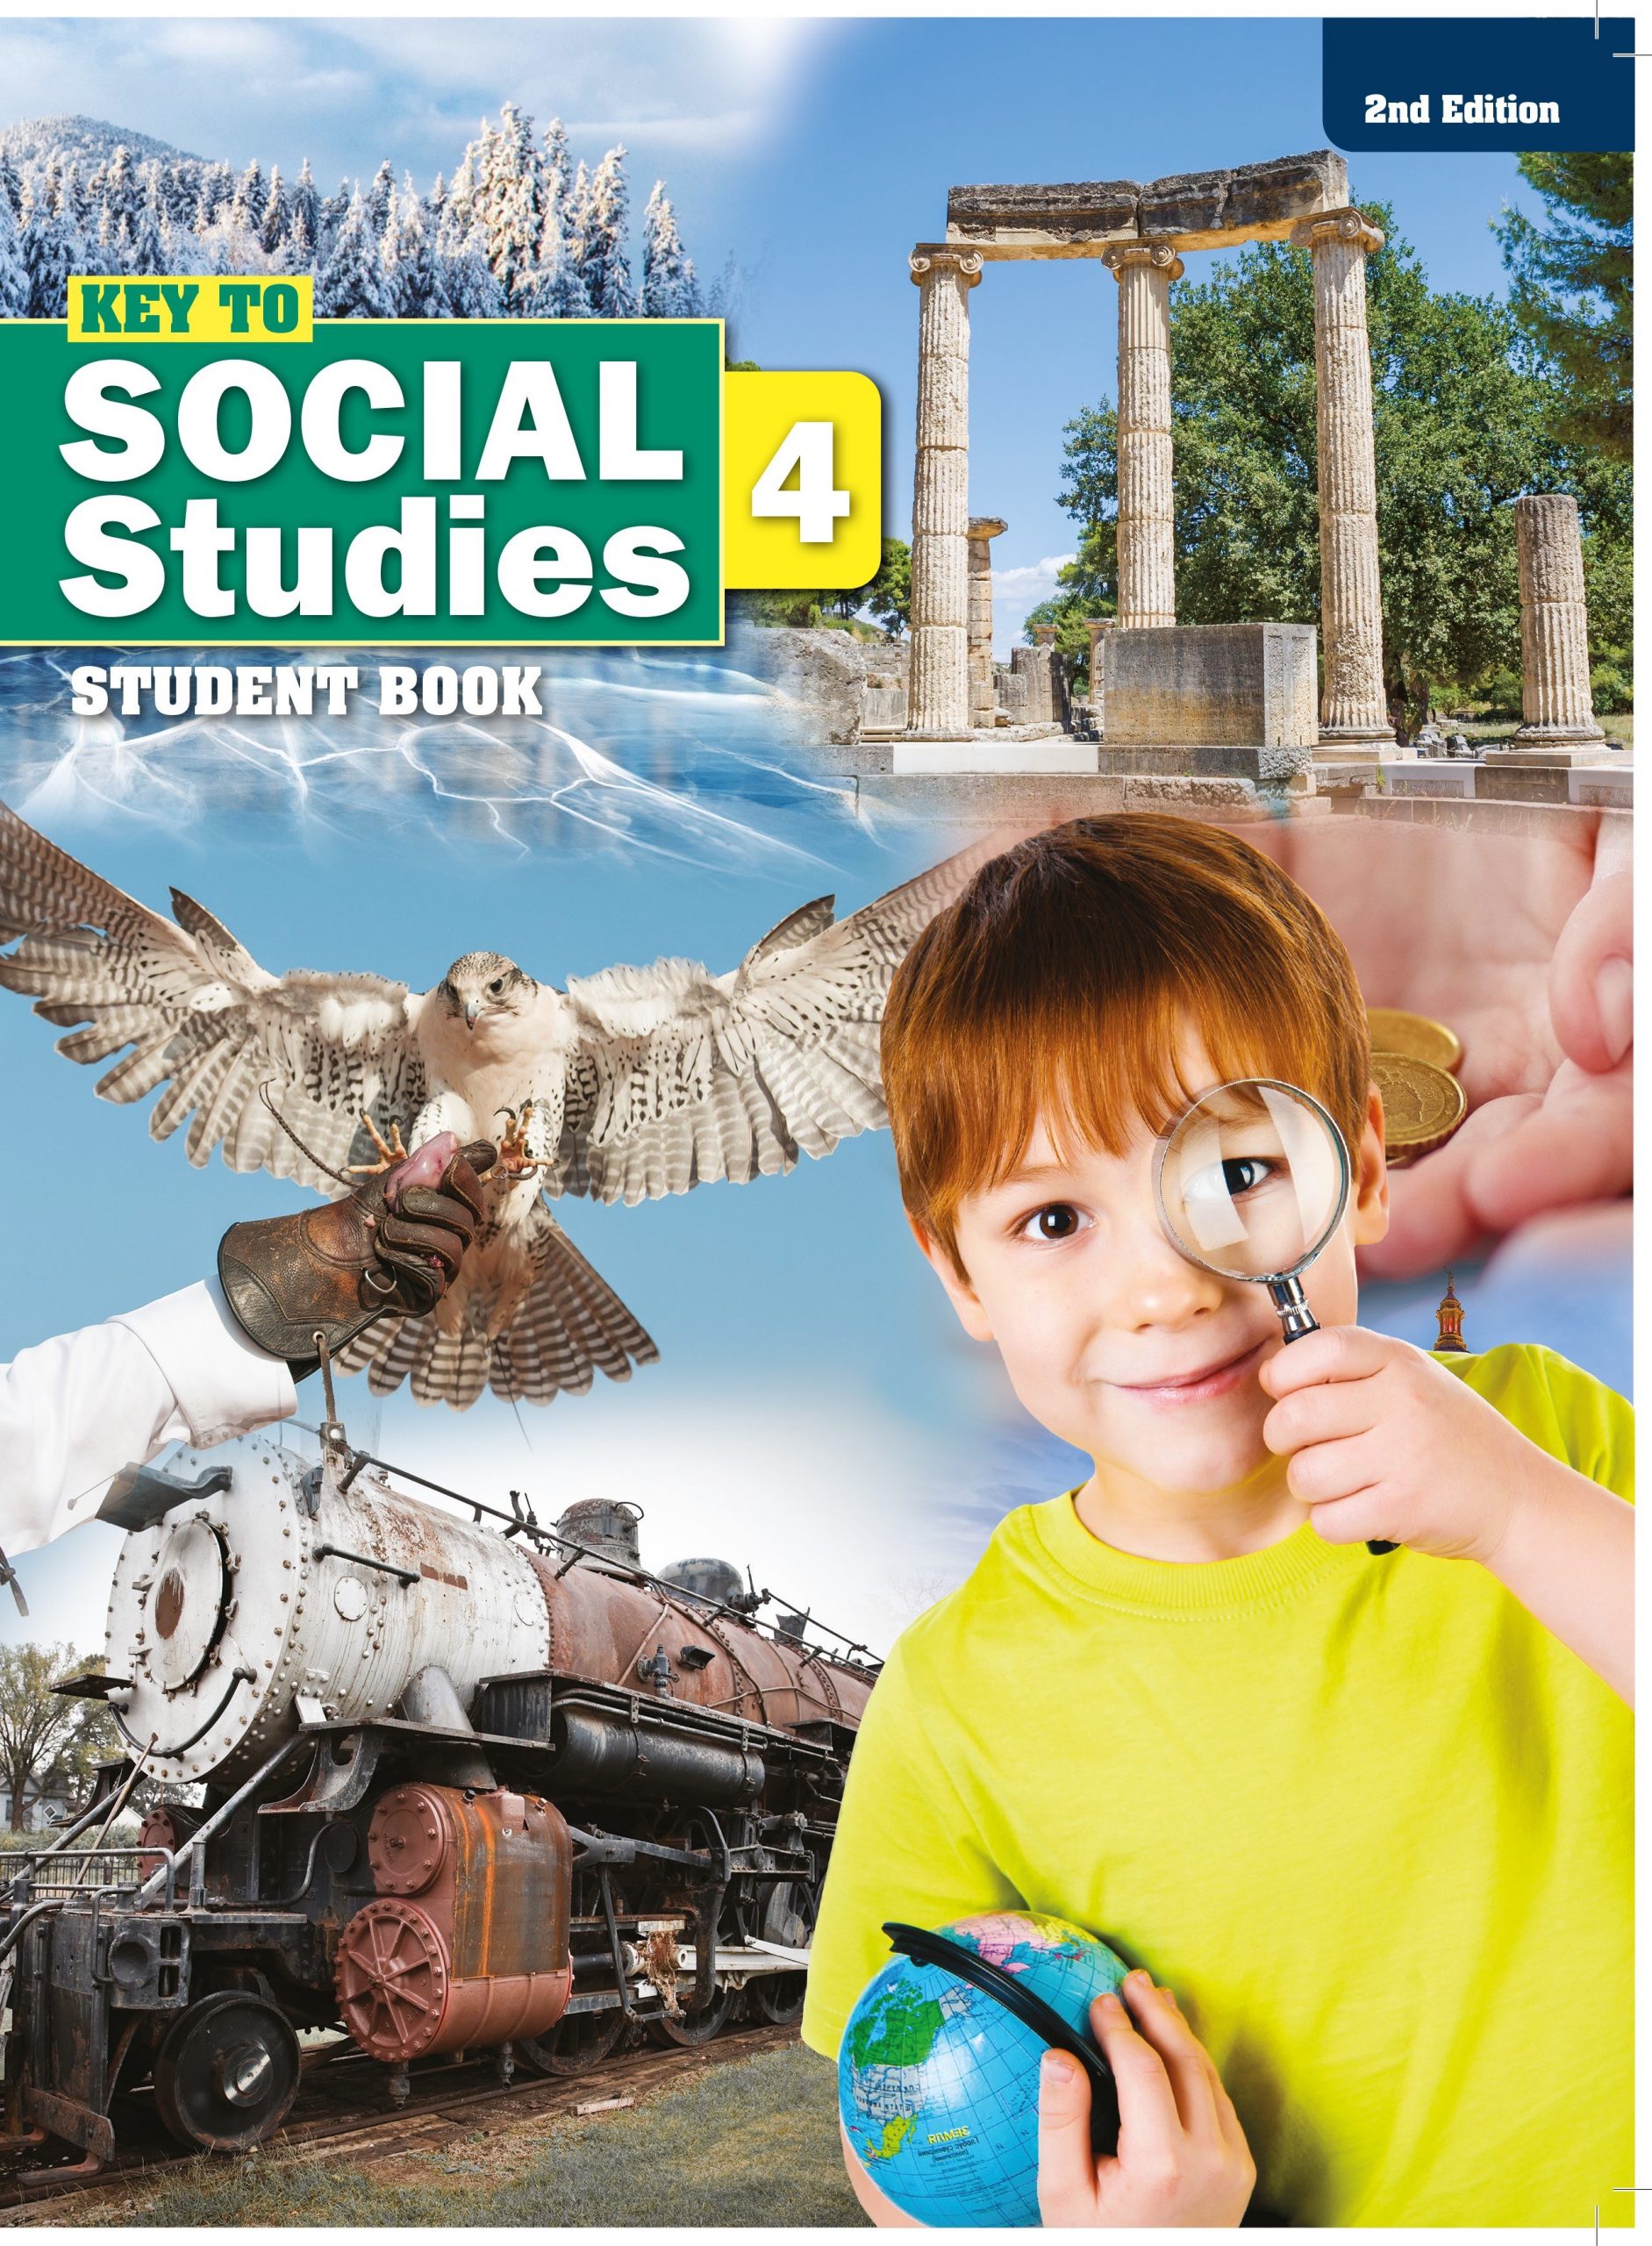 Key to Social Studies Student Book 4 (New Edition)